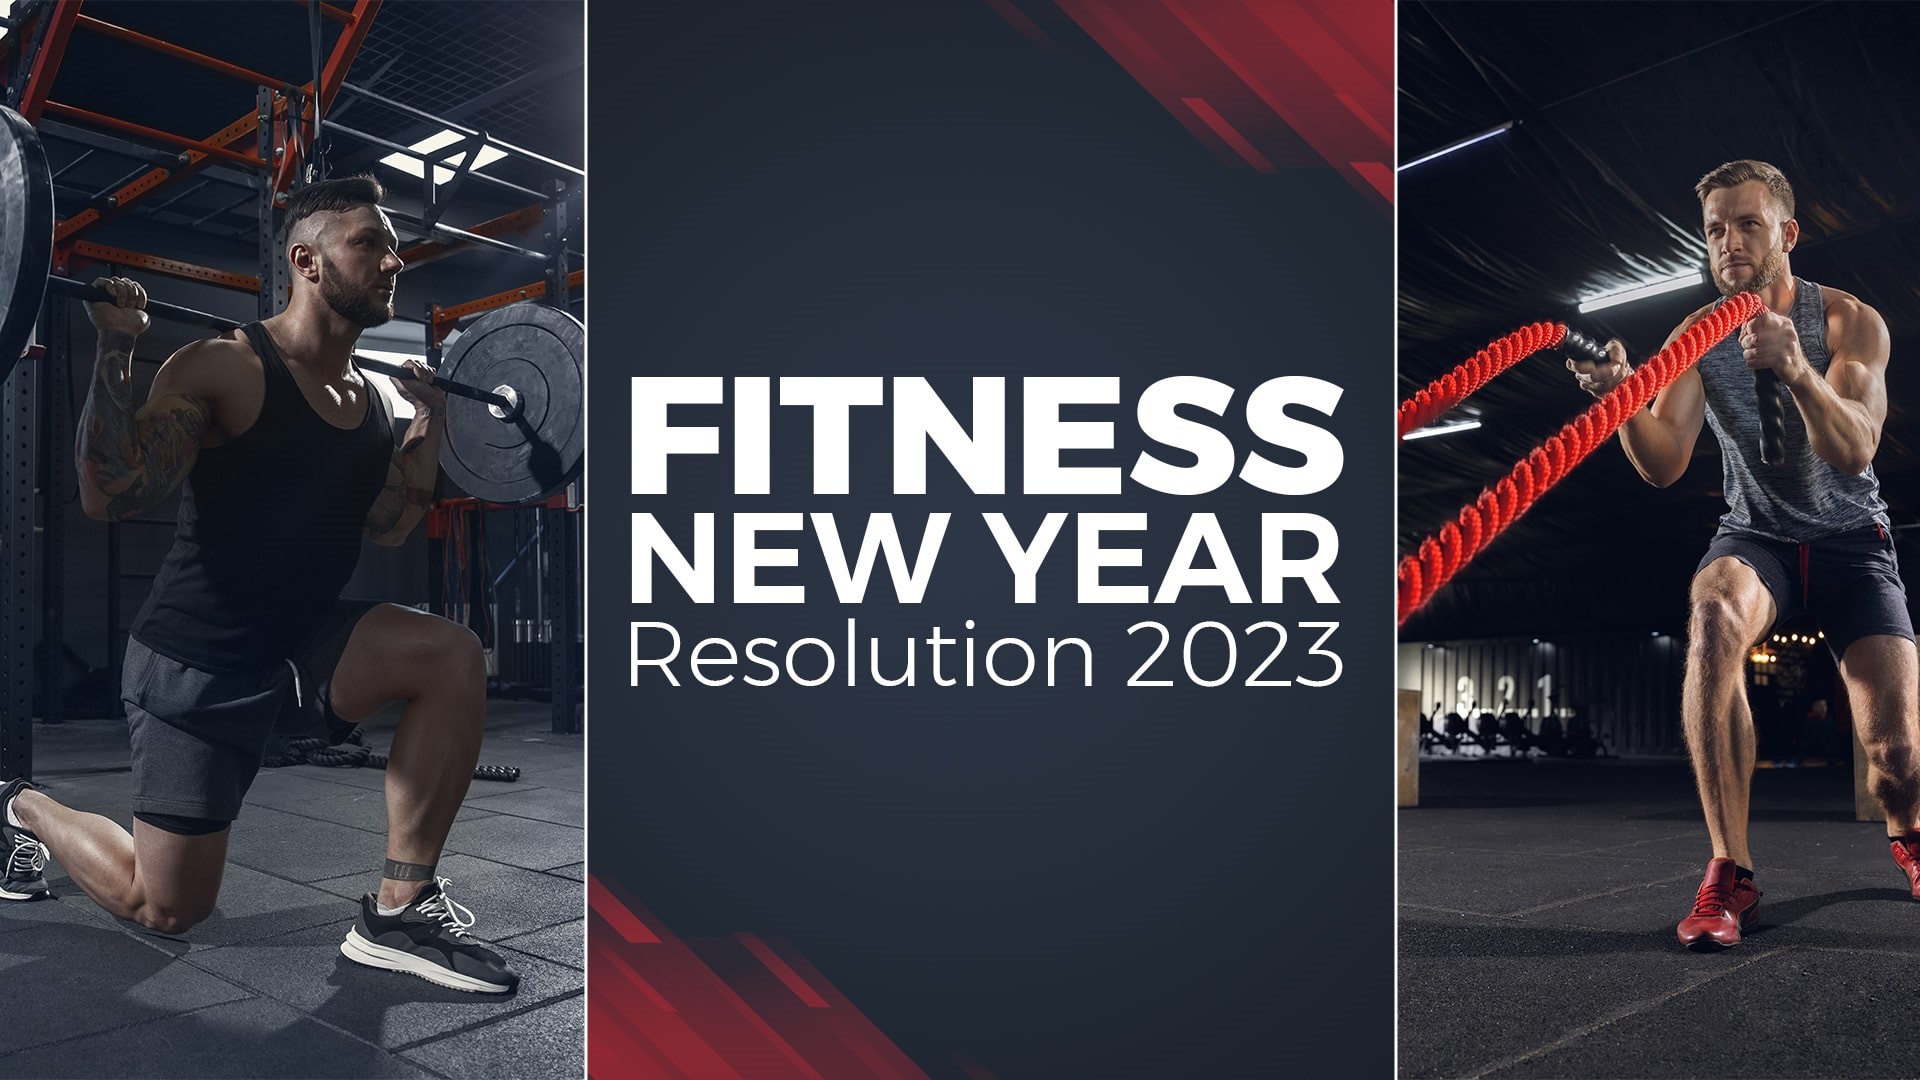 New Year Resolution For Health And Fitness